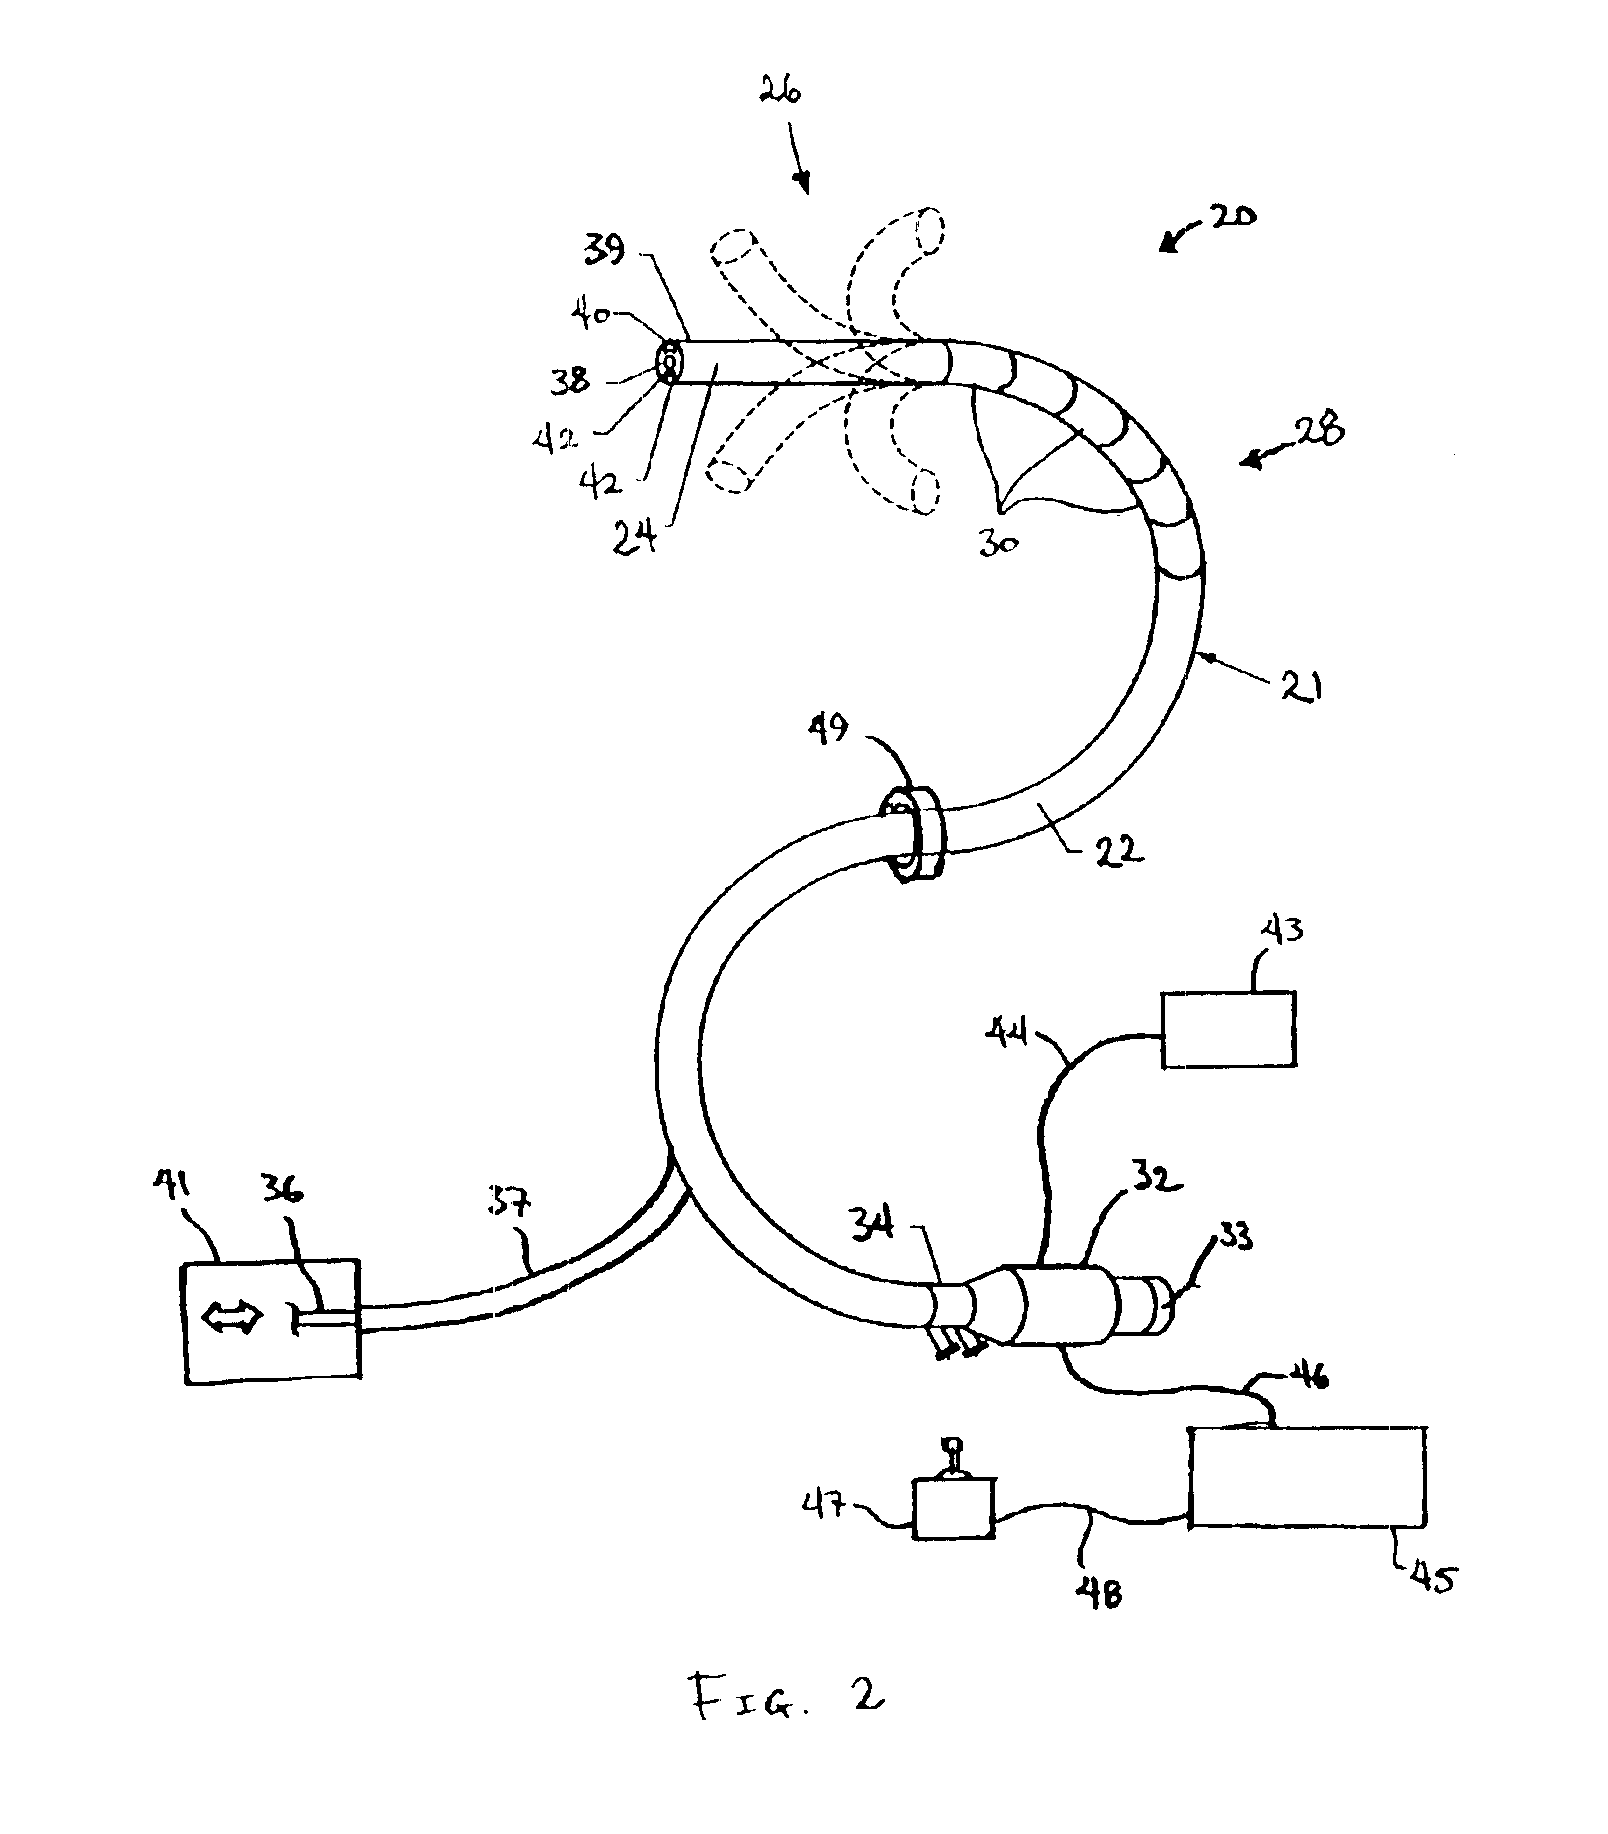 Endoscope with adjacently positioned guiding apparatus